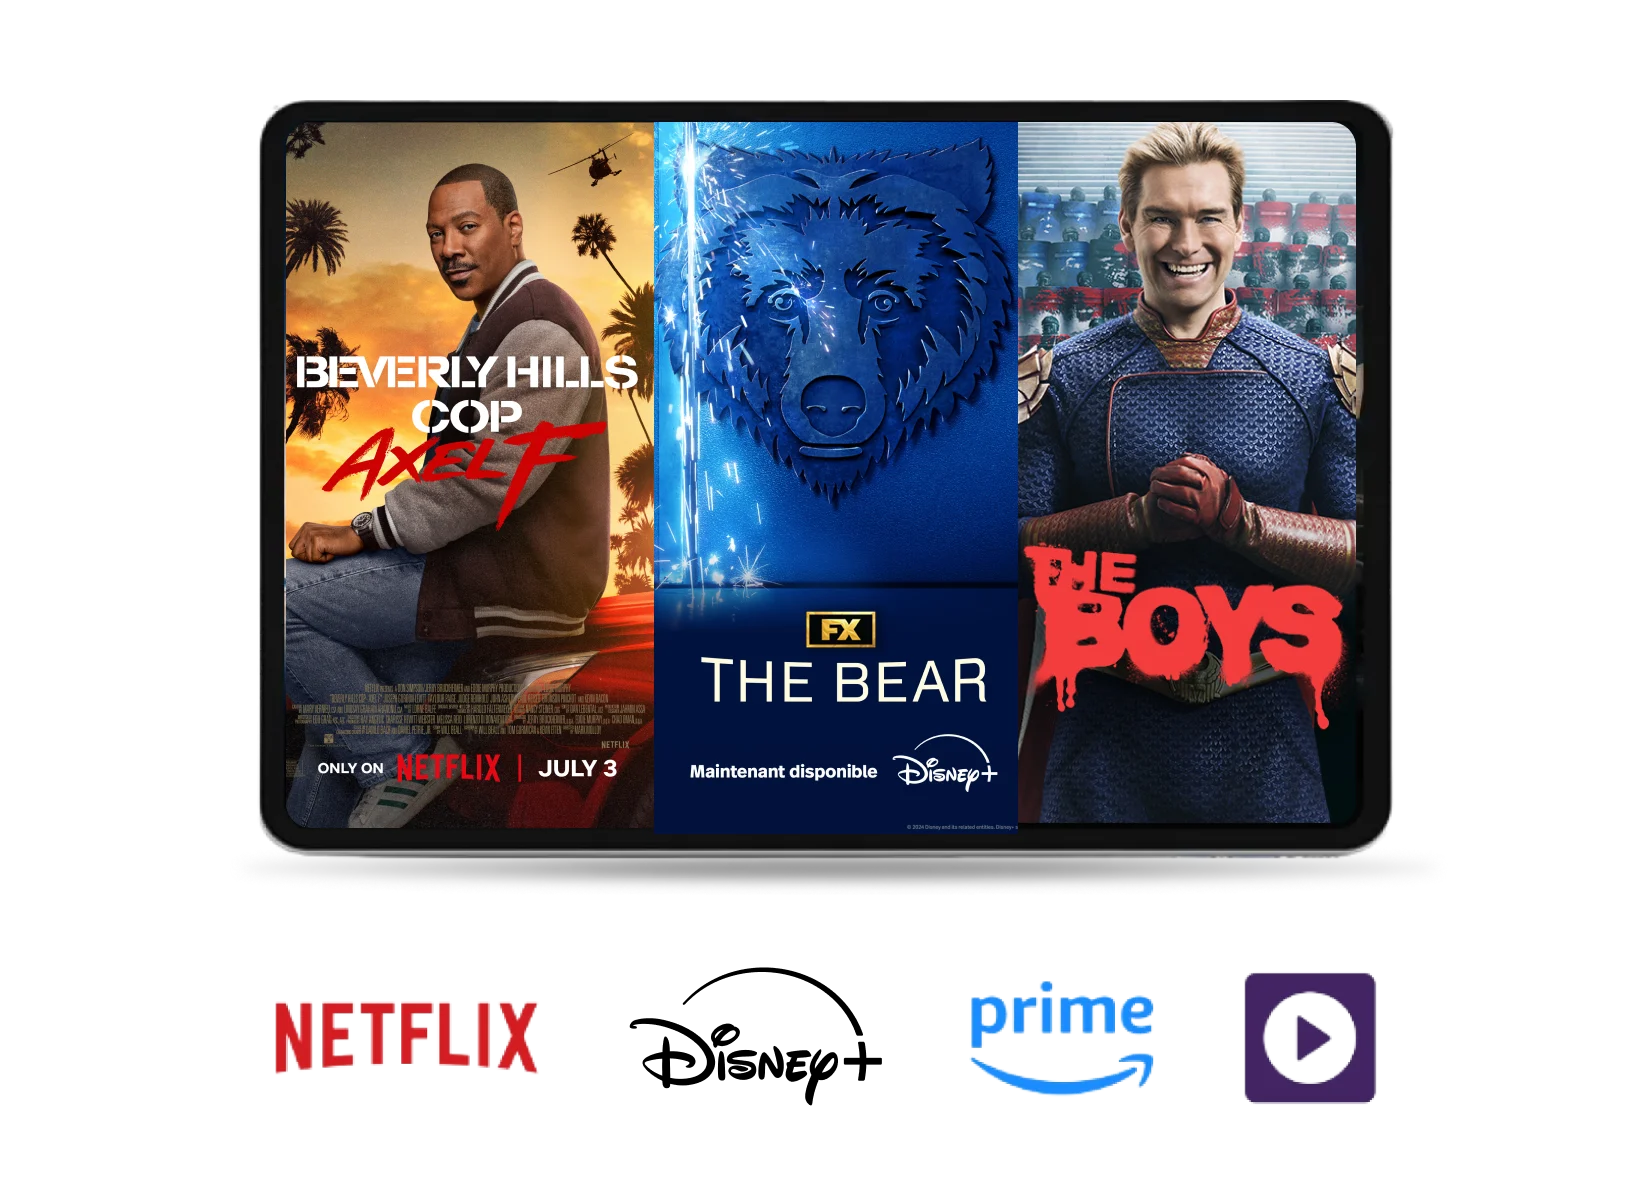 Tablet with posters for Beverly Hills Cop Axel F on Netflix, The Bear on Disney+, The Boys on Prime.